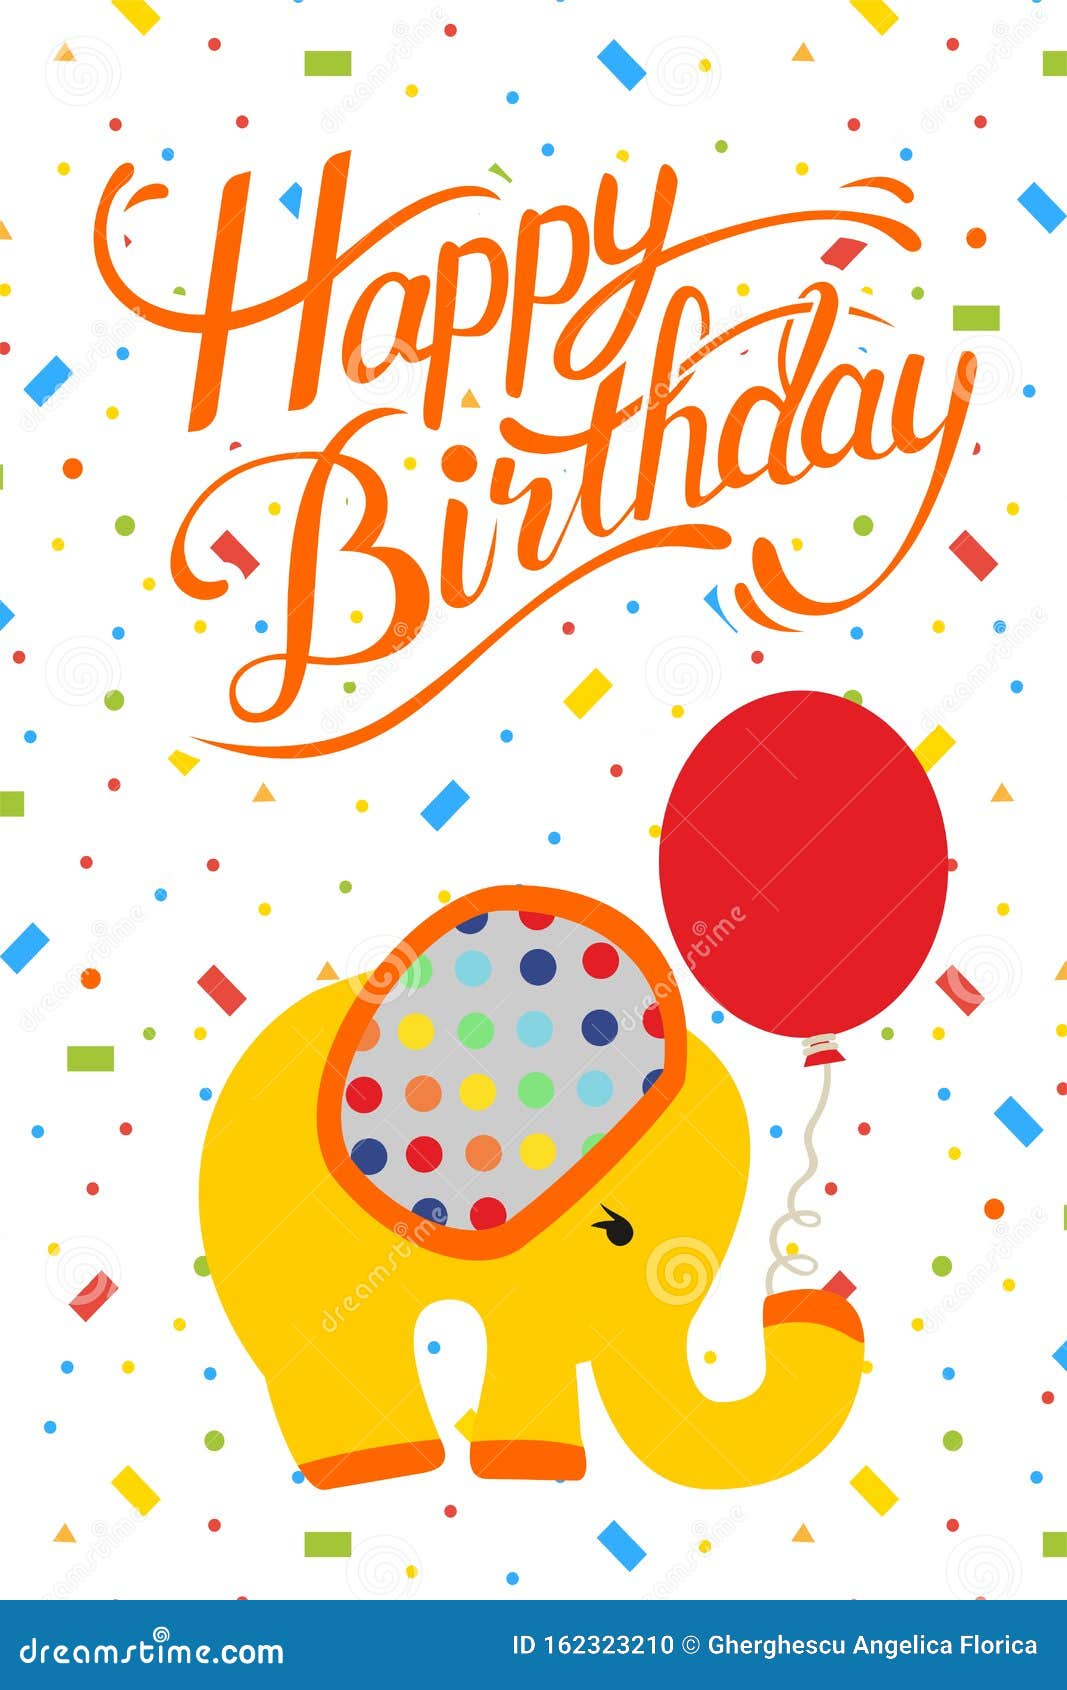 Vector Happy Birthday Card with Balloons Confetti and Cute Elephant ...